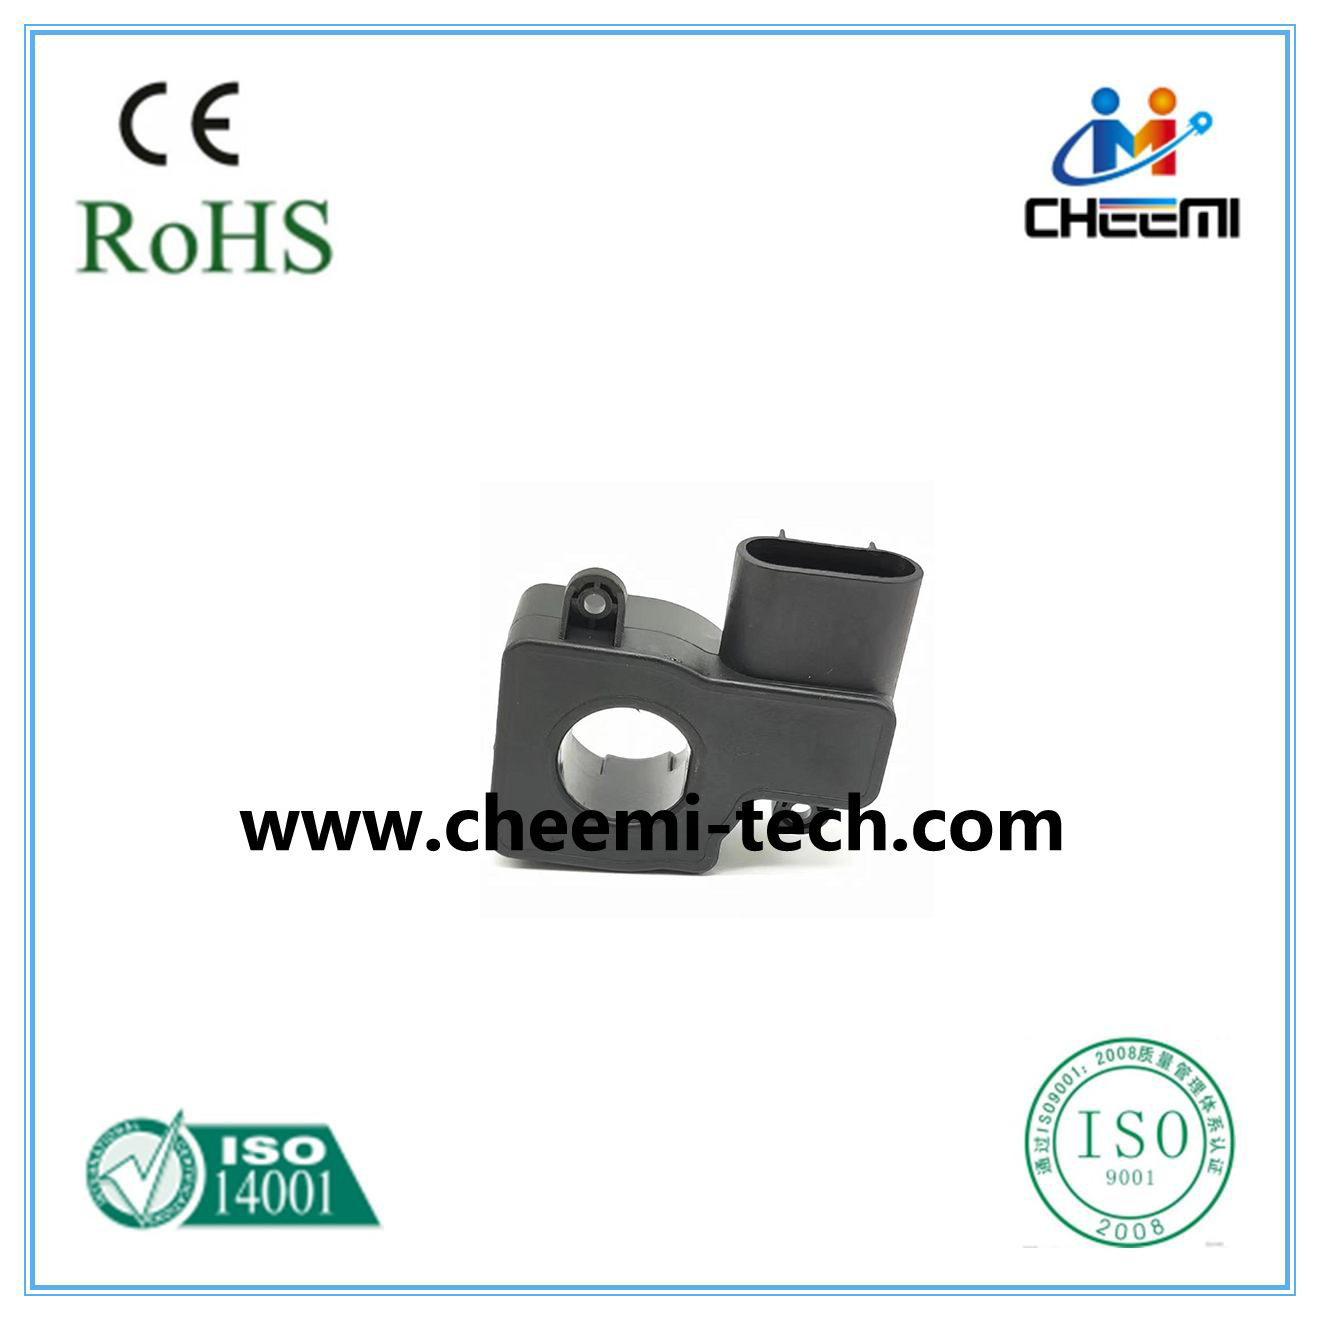 Two Channels current detecting current transducers CHK-DHAB5S2L widely used in New energy Vehicles